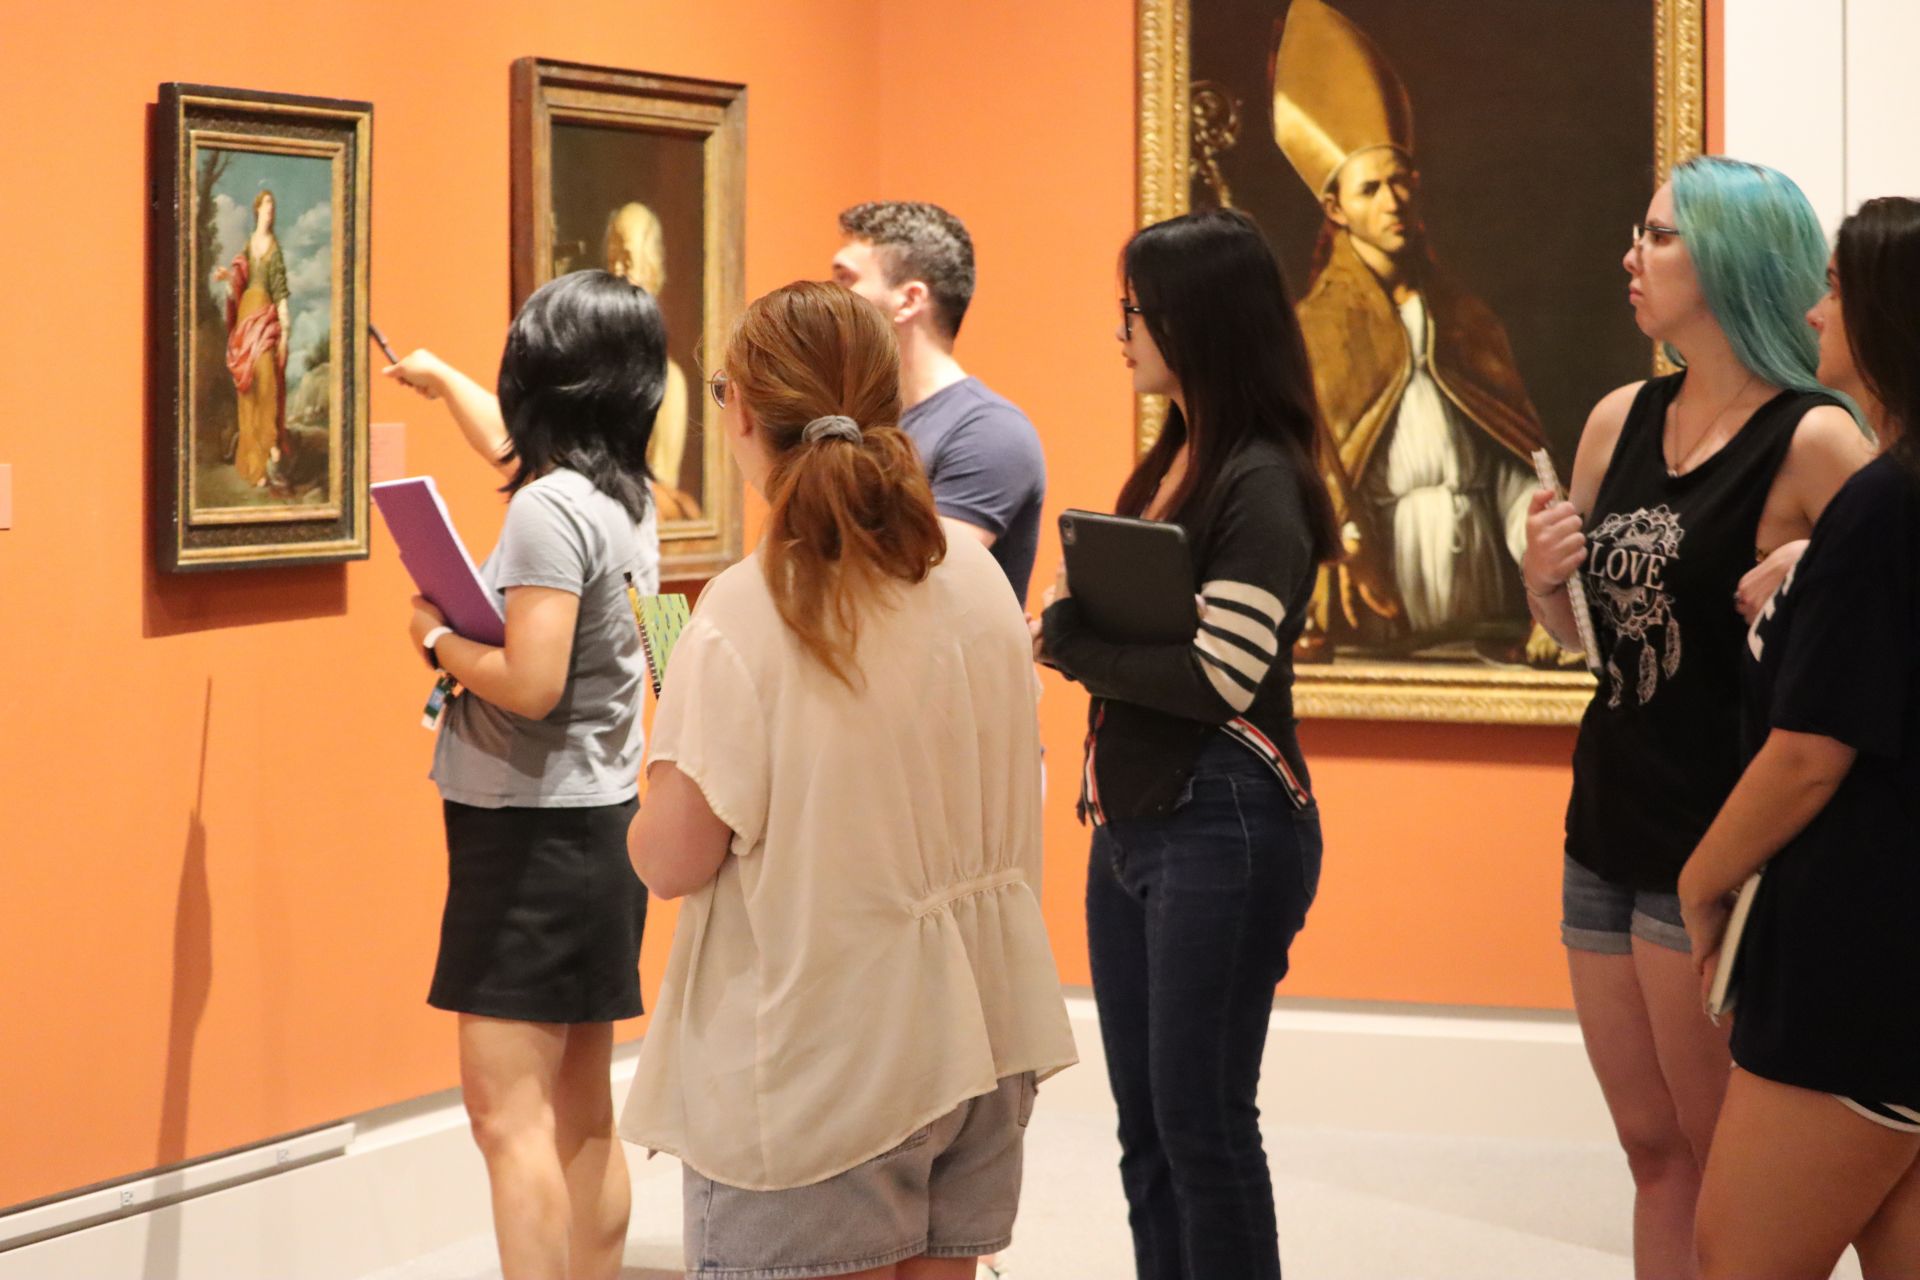 Group of students watching as woman points to a painting in the museum